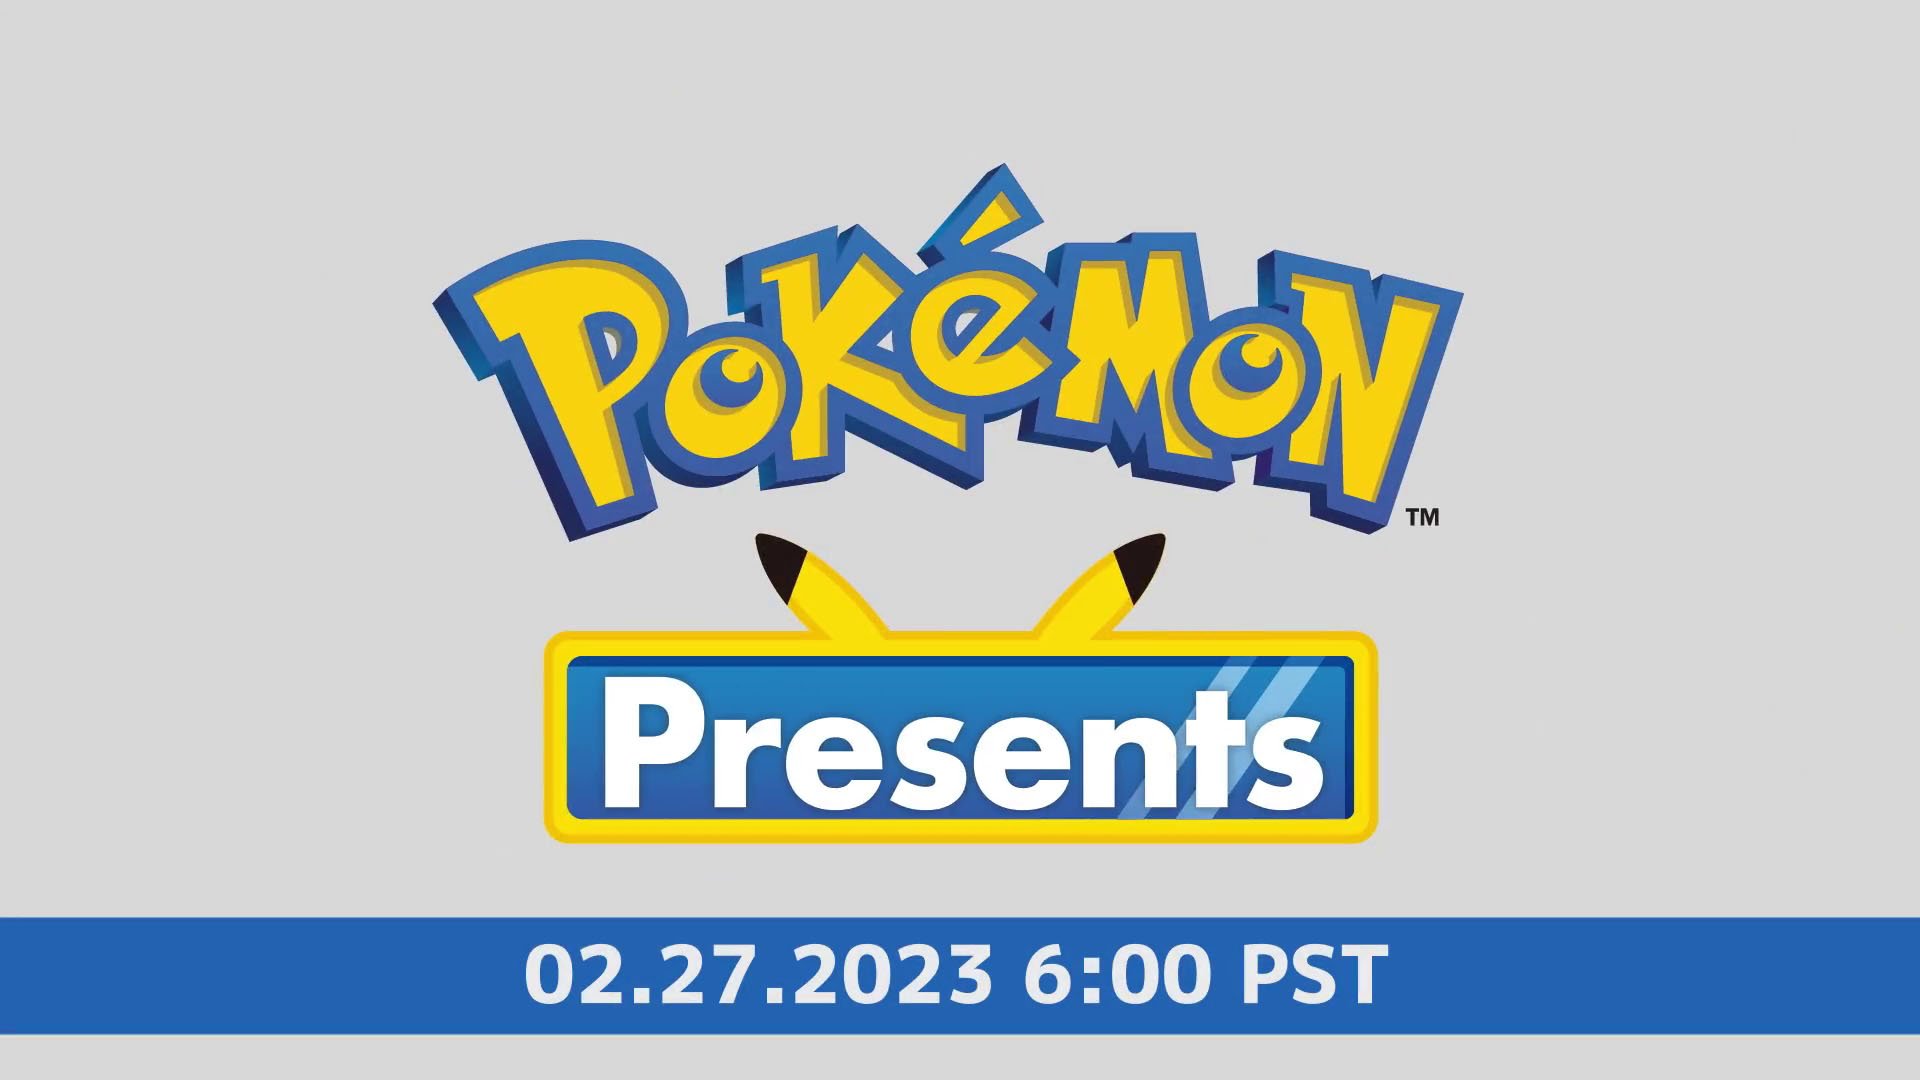 #
      Pokemon Presents set for February 27 featuring 20 minutes of Pokemon news